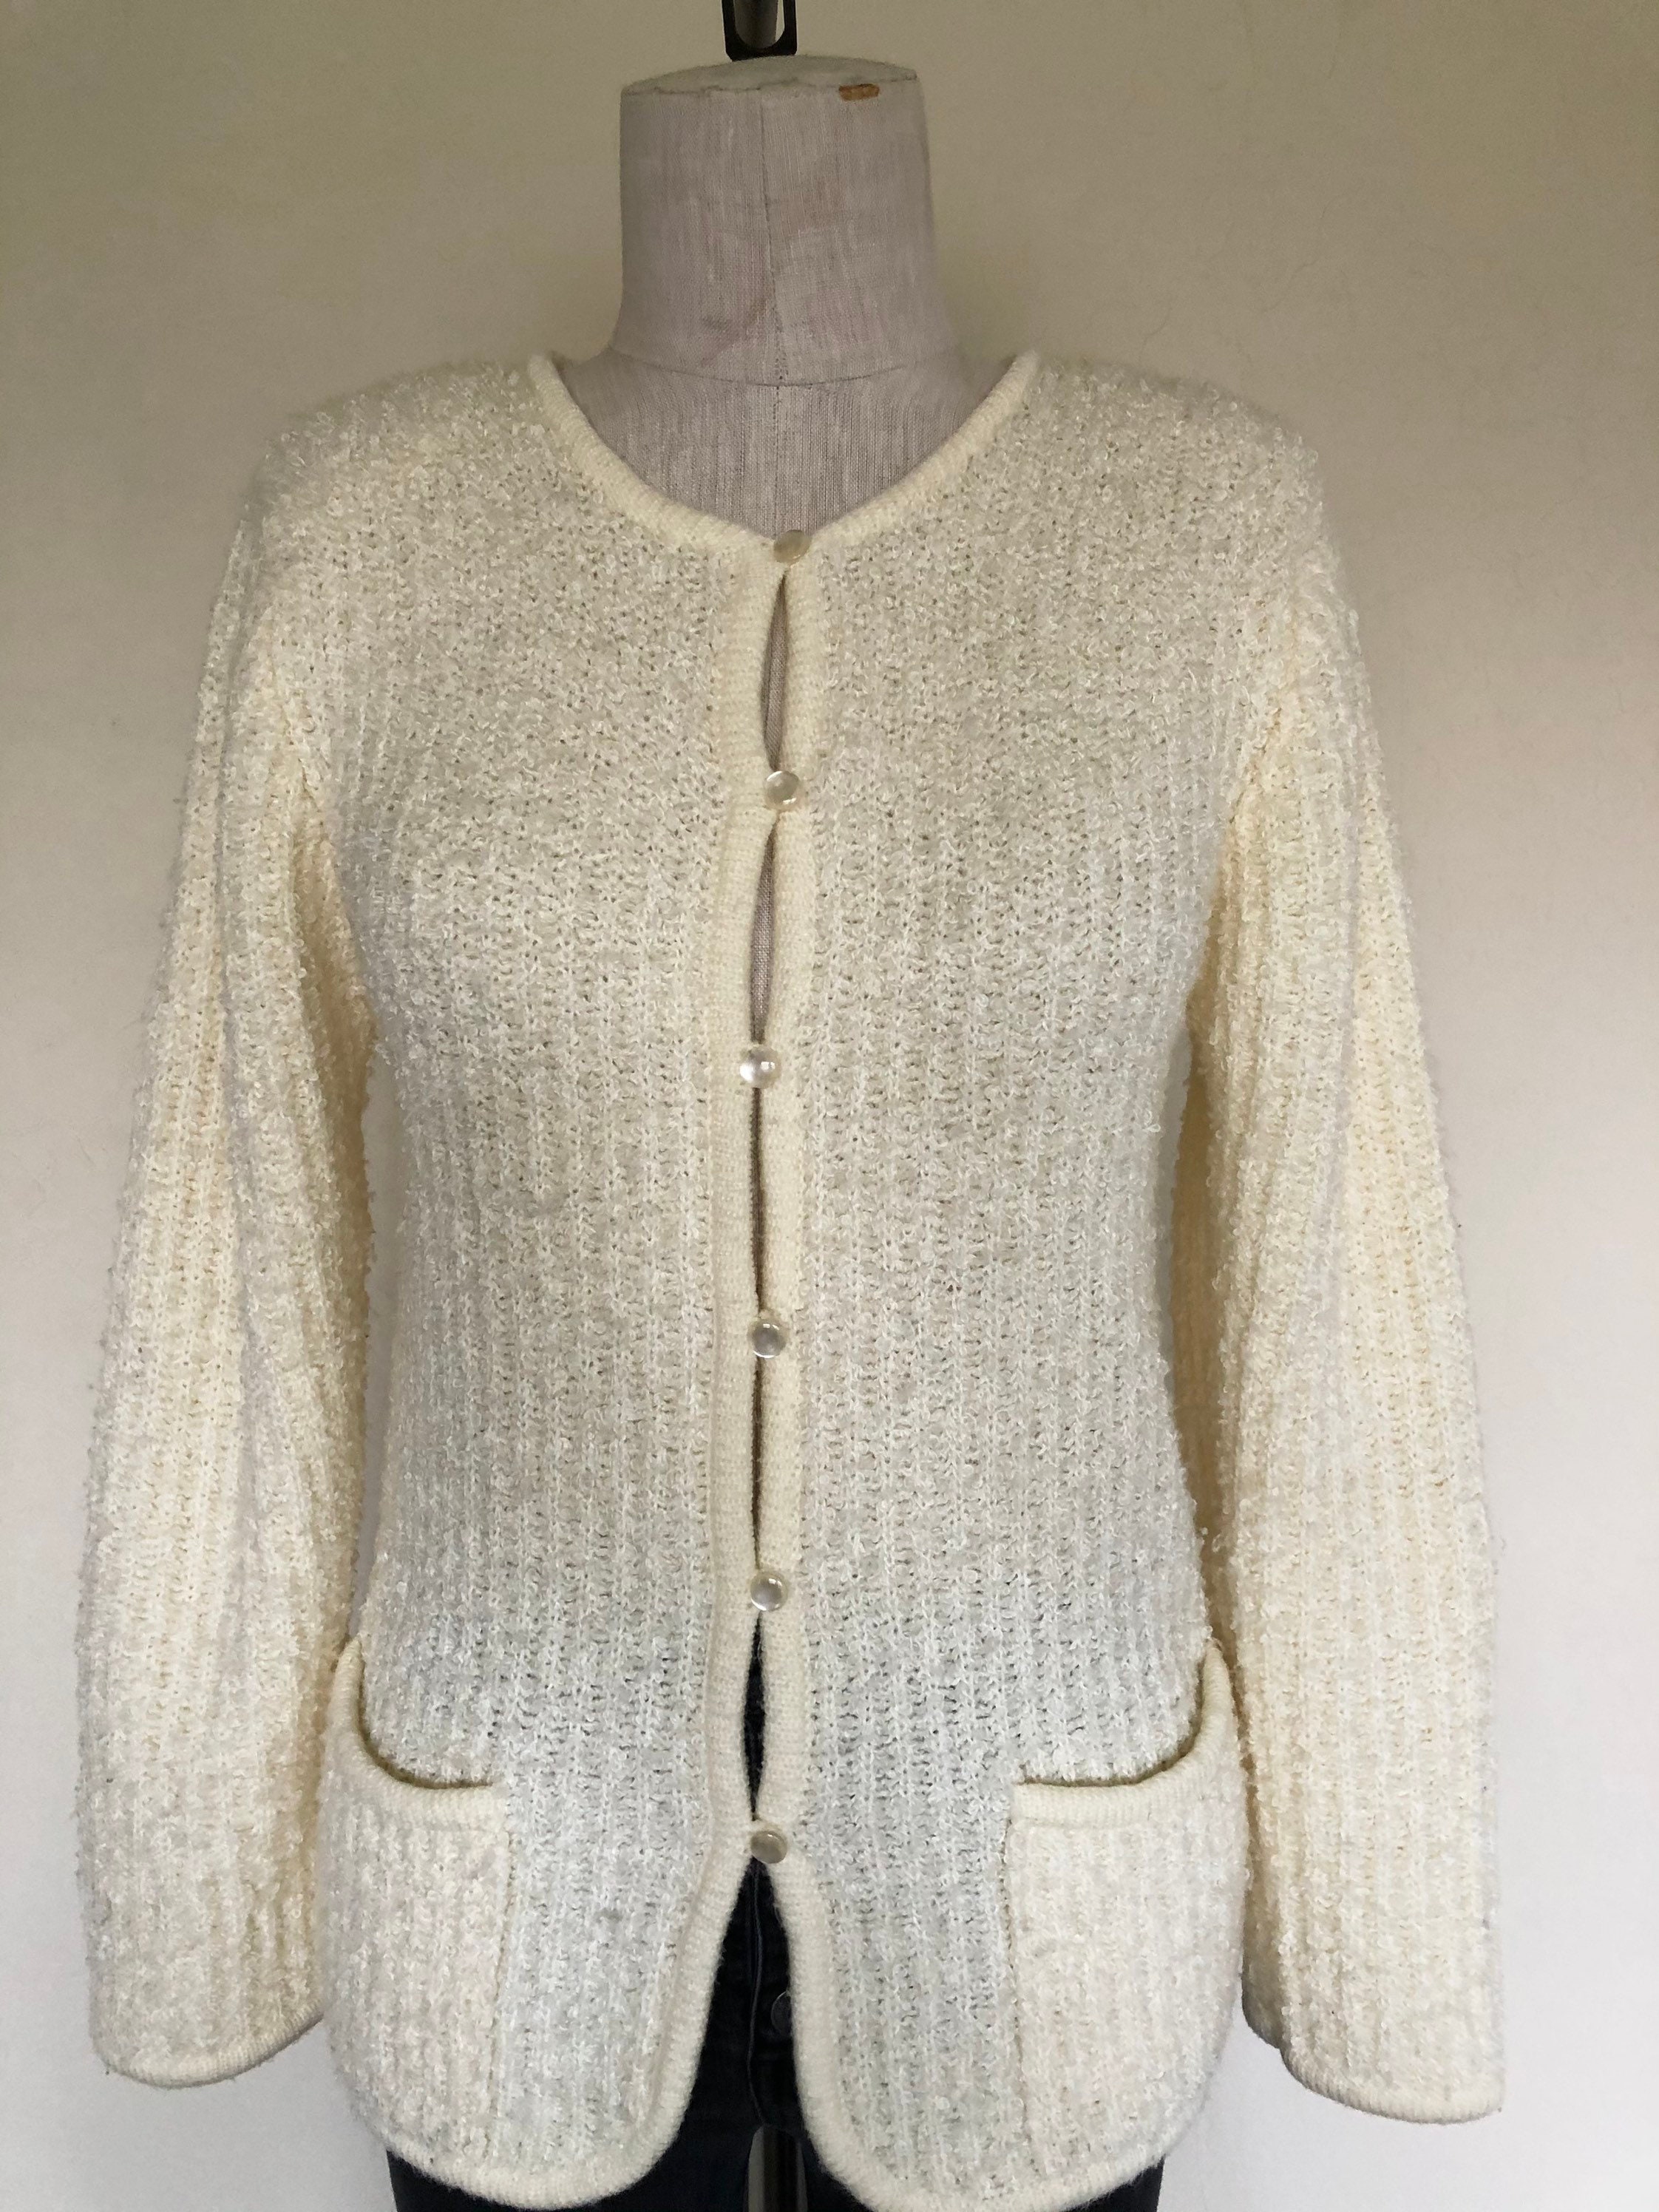 Vintage 1990's cardigan CREAM TEXTURED knit with shoulder | Etsy